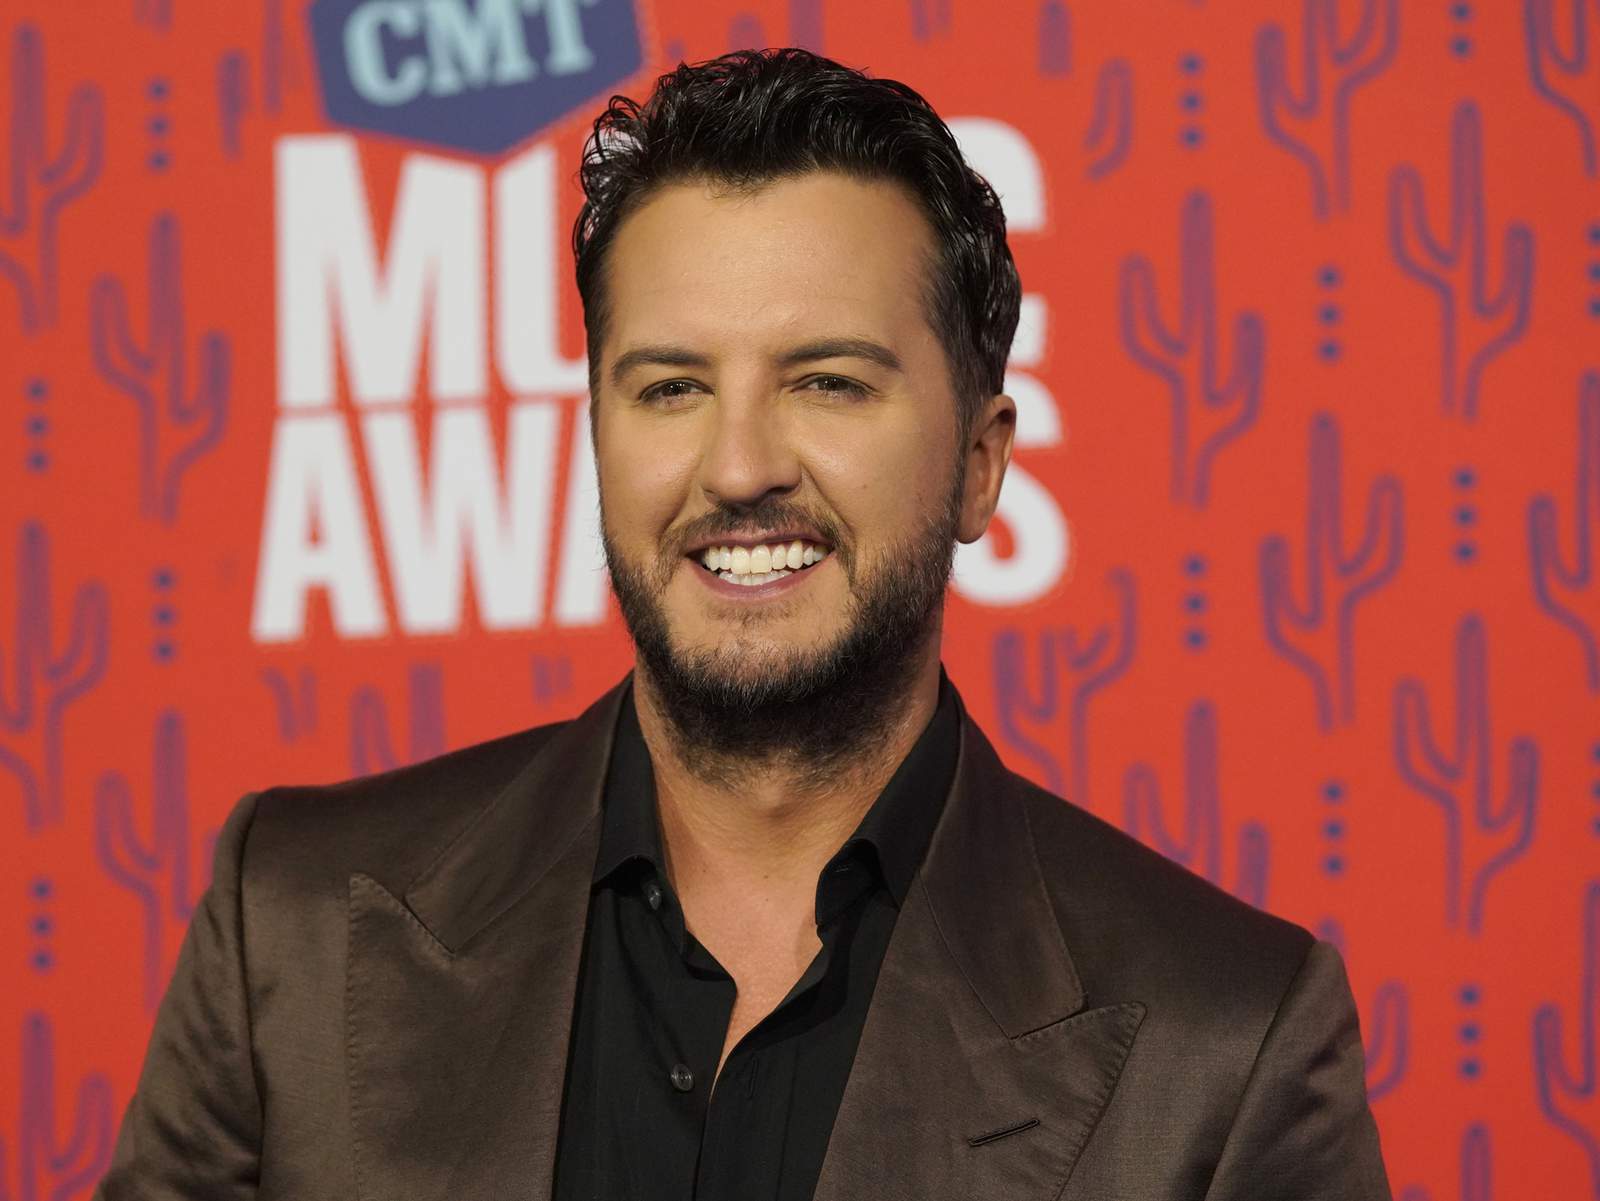 Luke Bryan tests positive for COVID, sidelined from 'Idol'